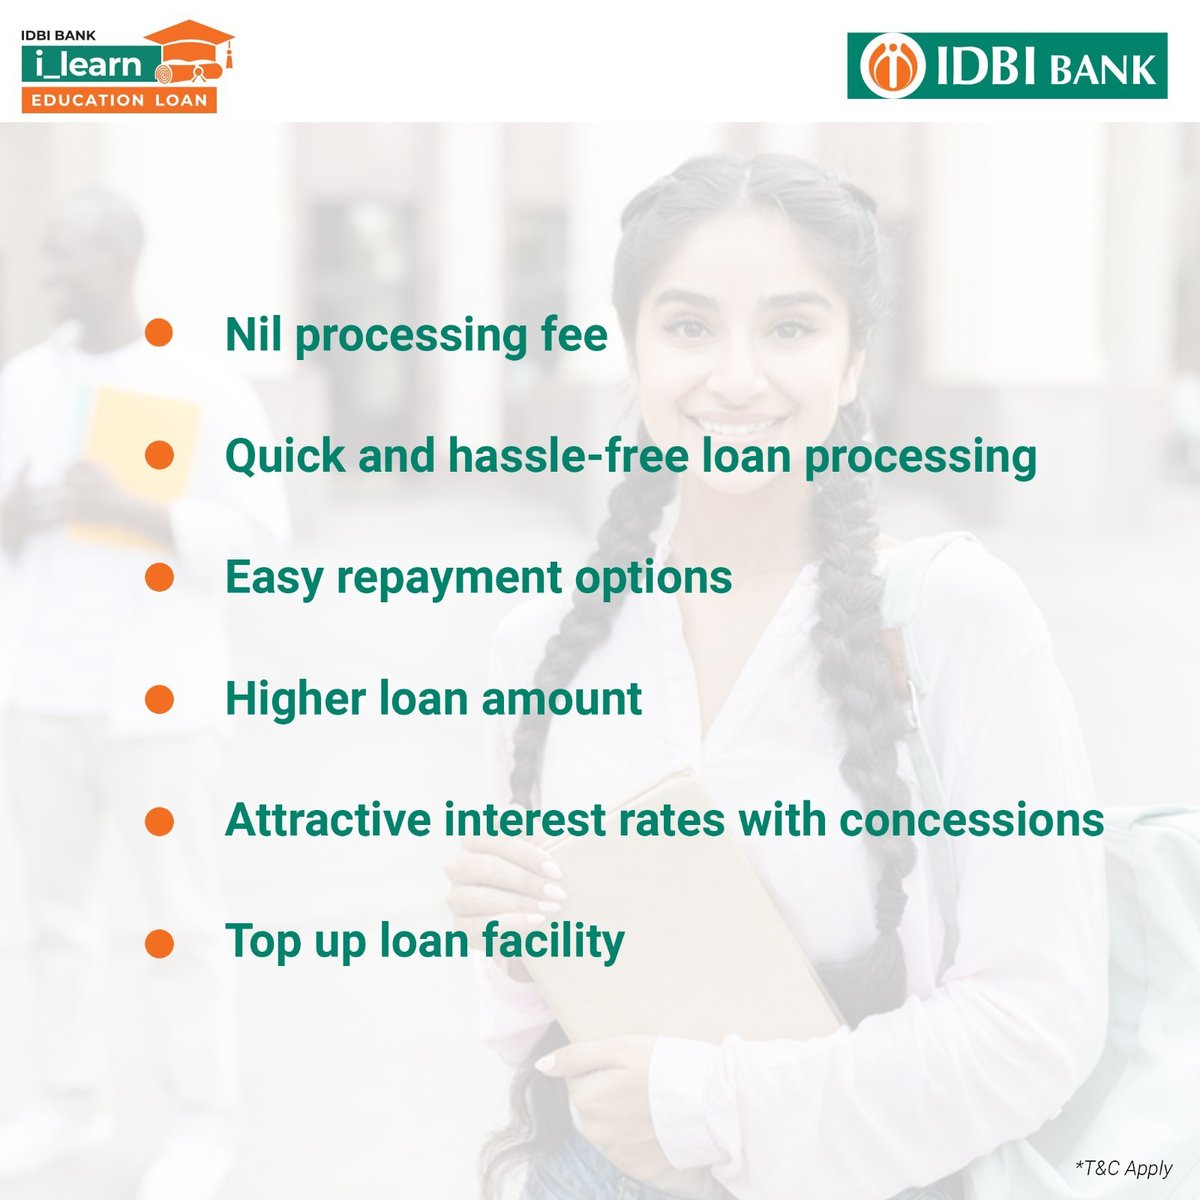 Turn your dreams into degrees with our hassle-free Education Loans. For more details, visit: idbibank.in/education-loan… #IDBIBank #EducationLoan